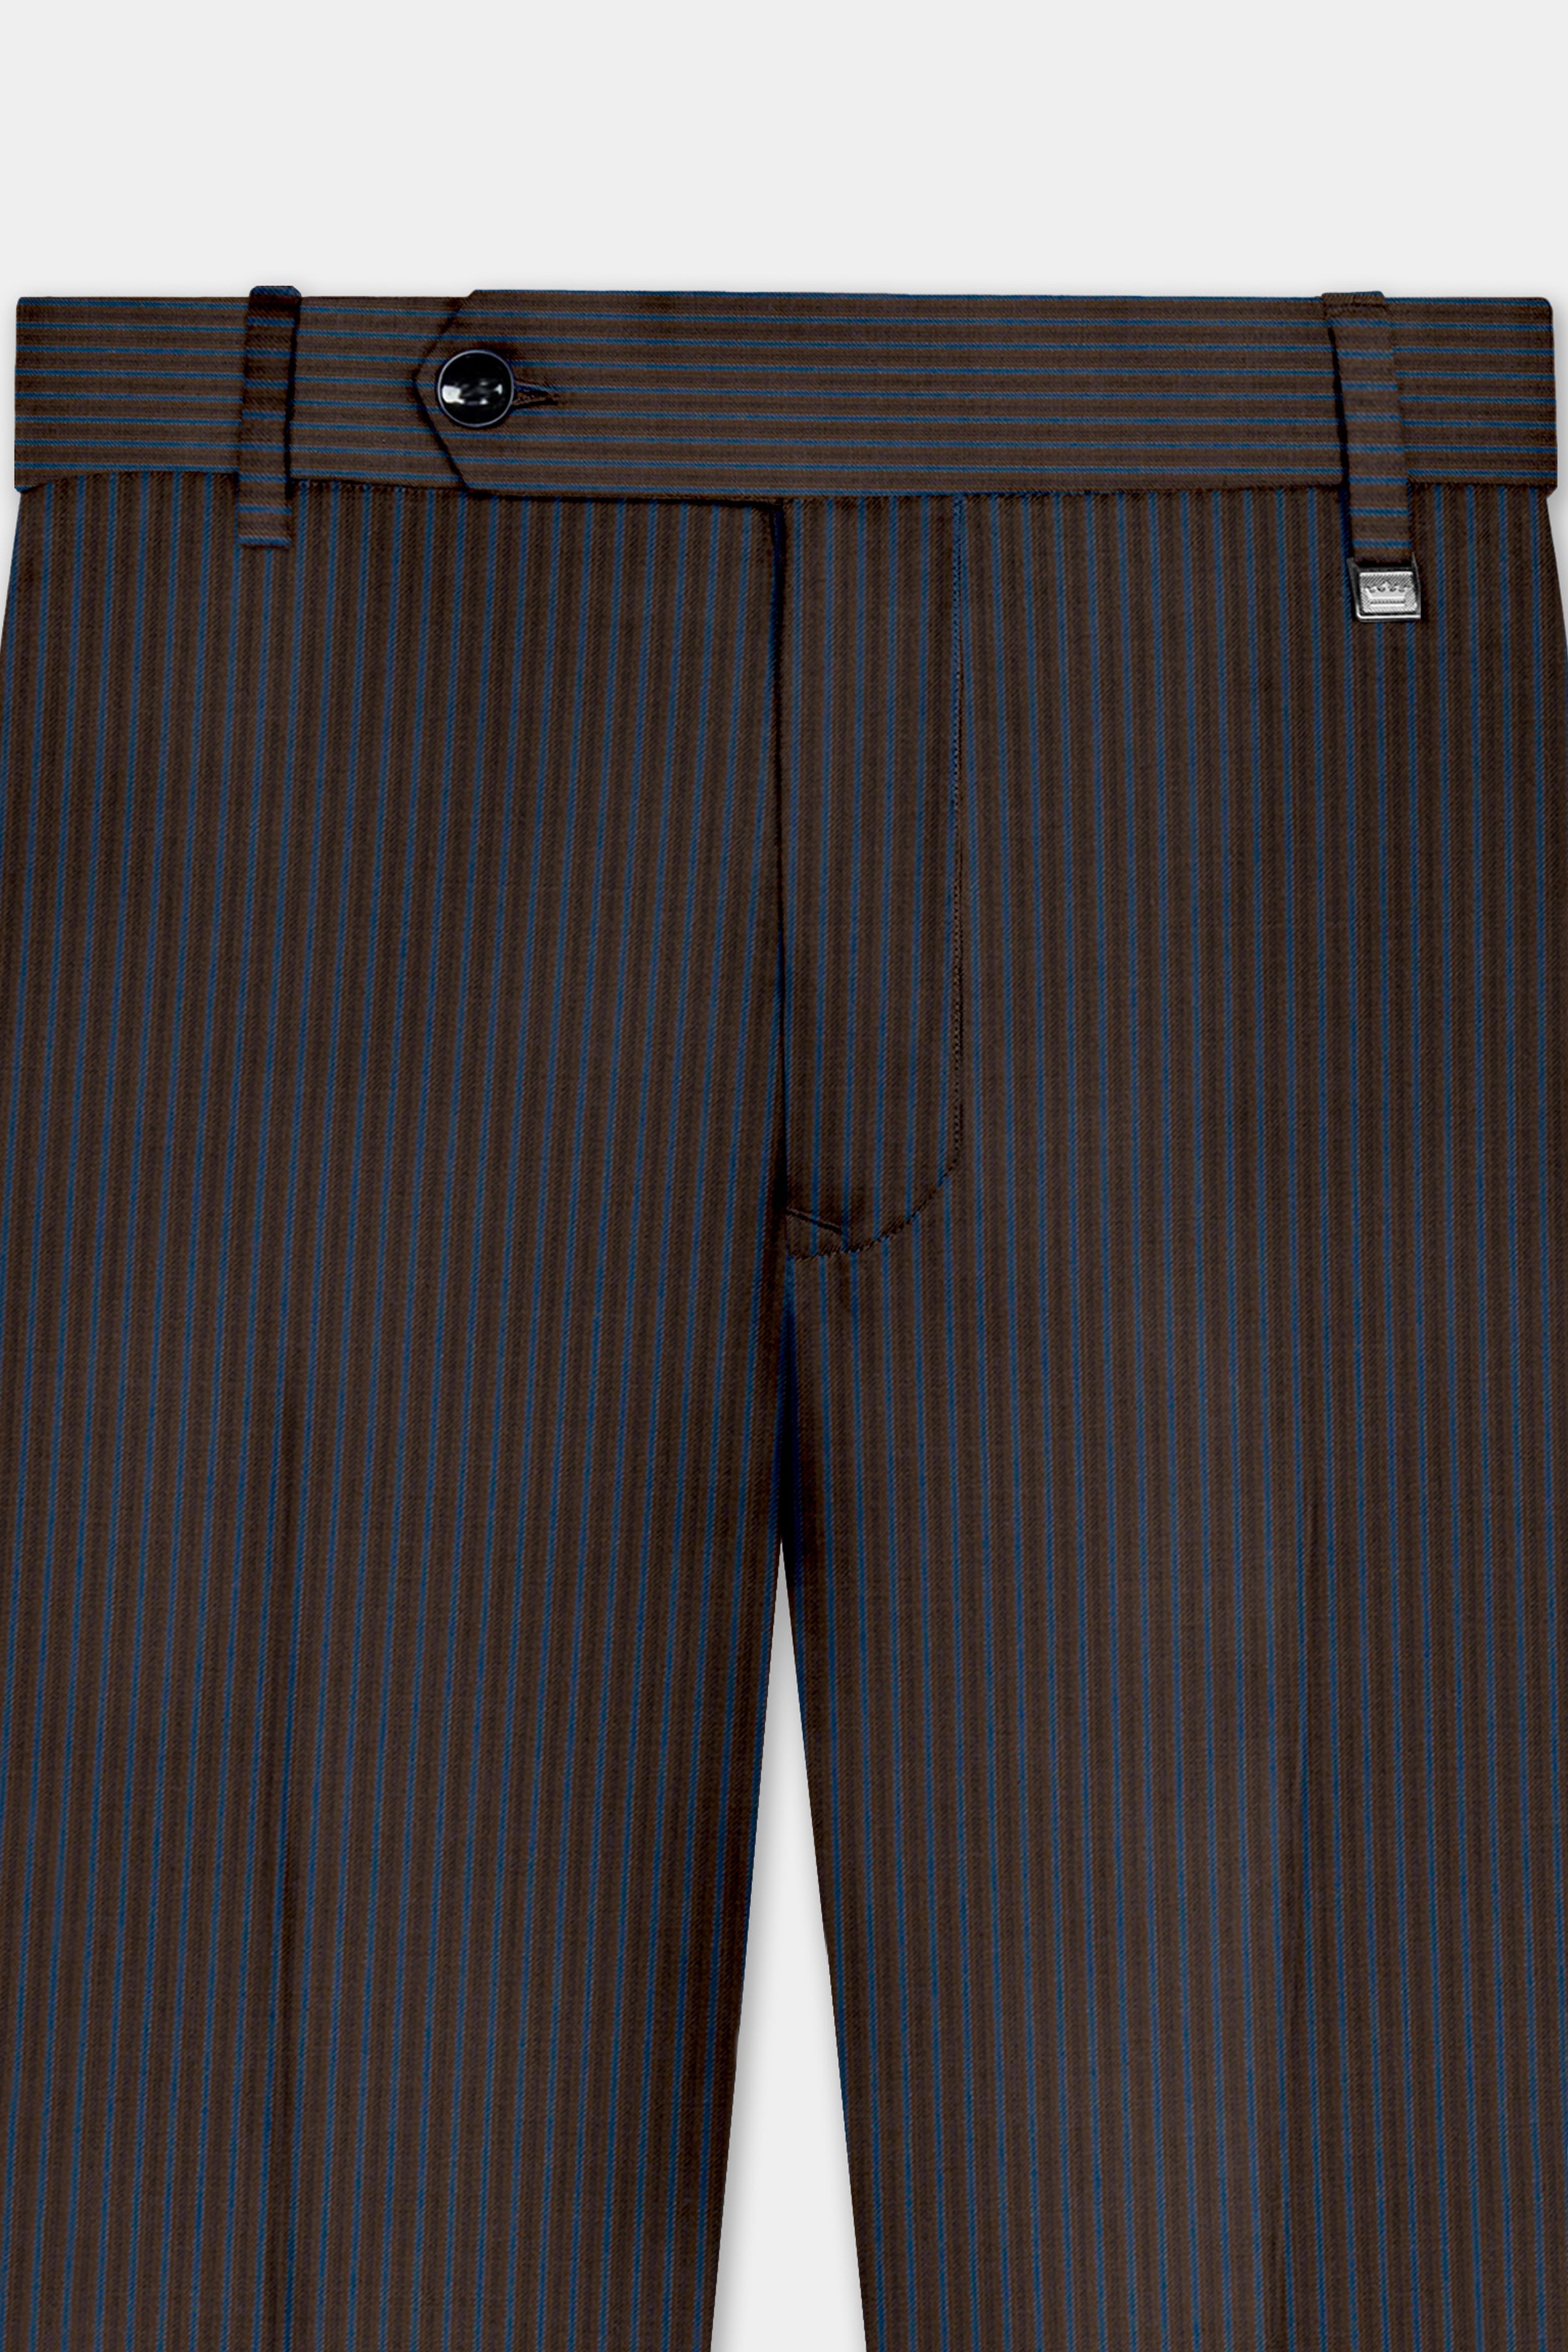 Eclipse Brown with Kashmir Blue Striped Wool Blend Double Breasted Suit